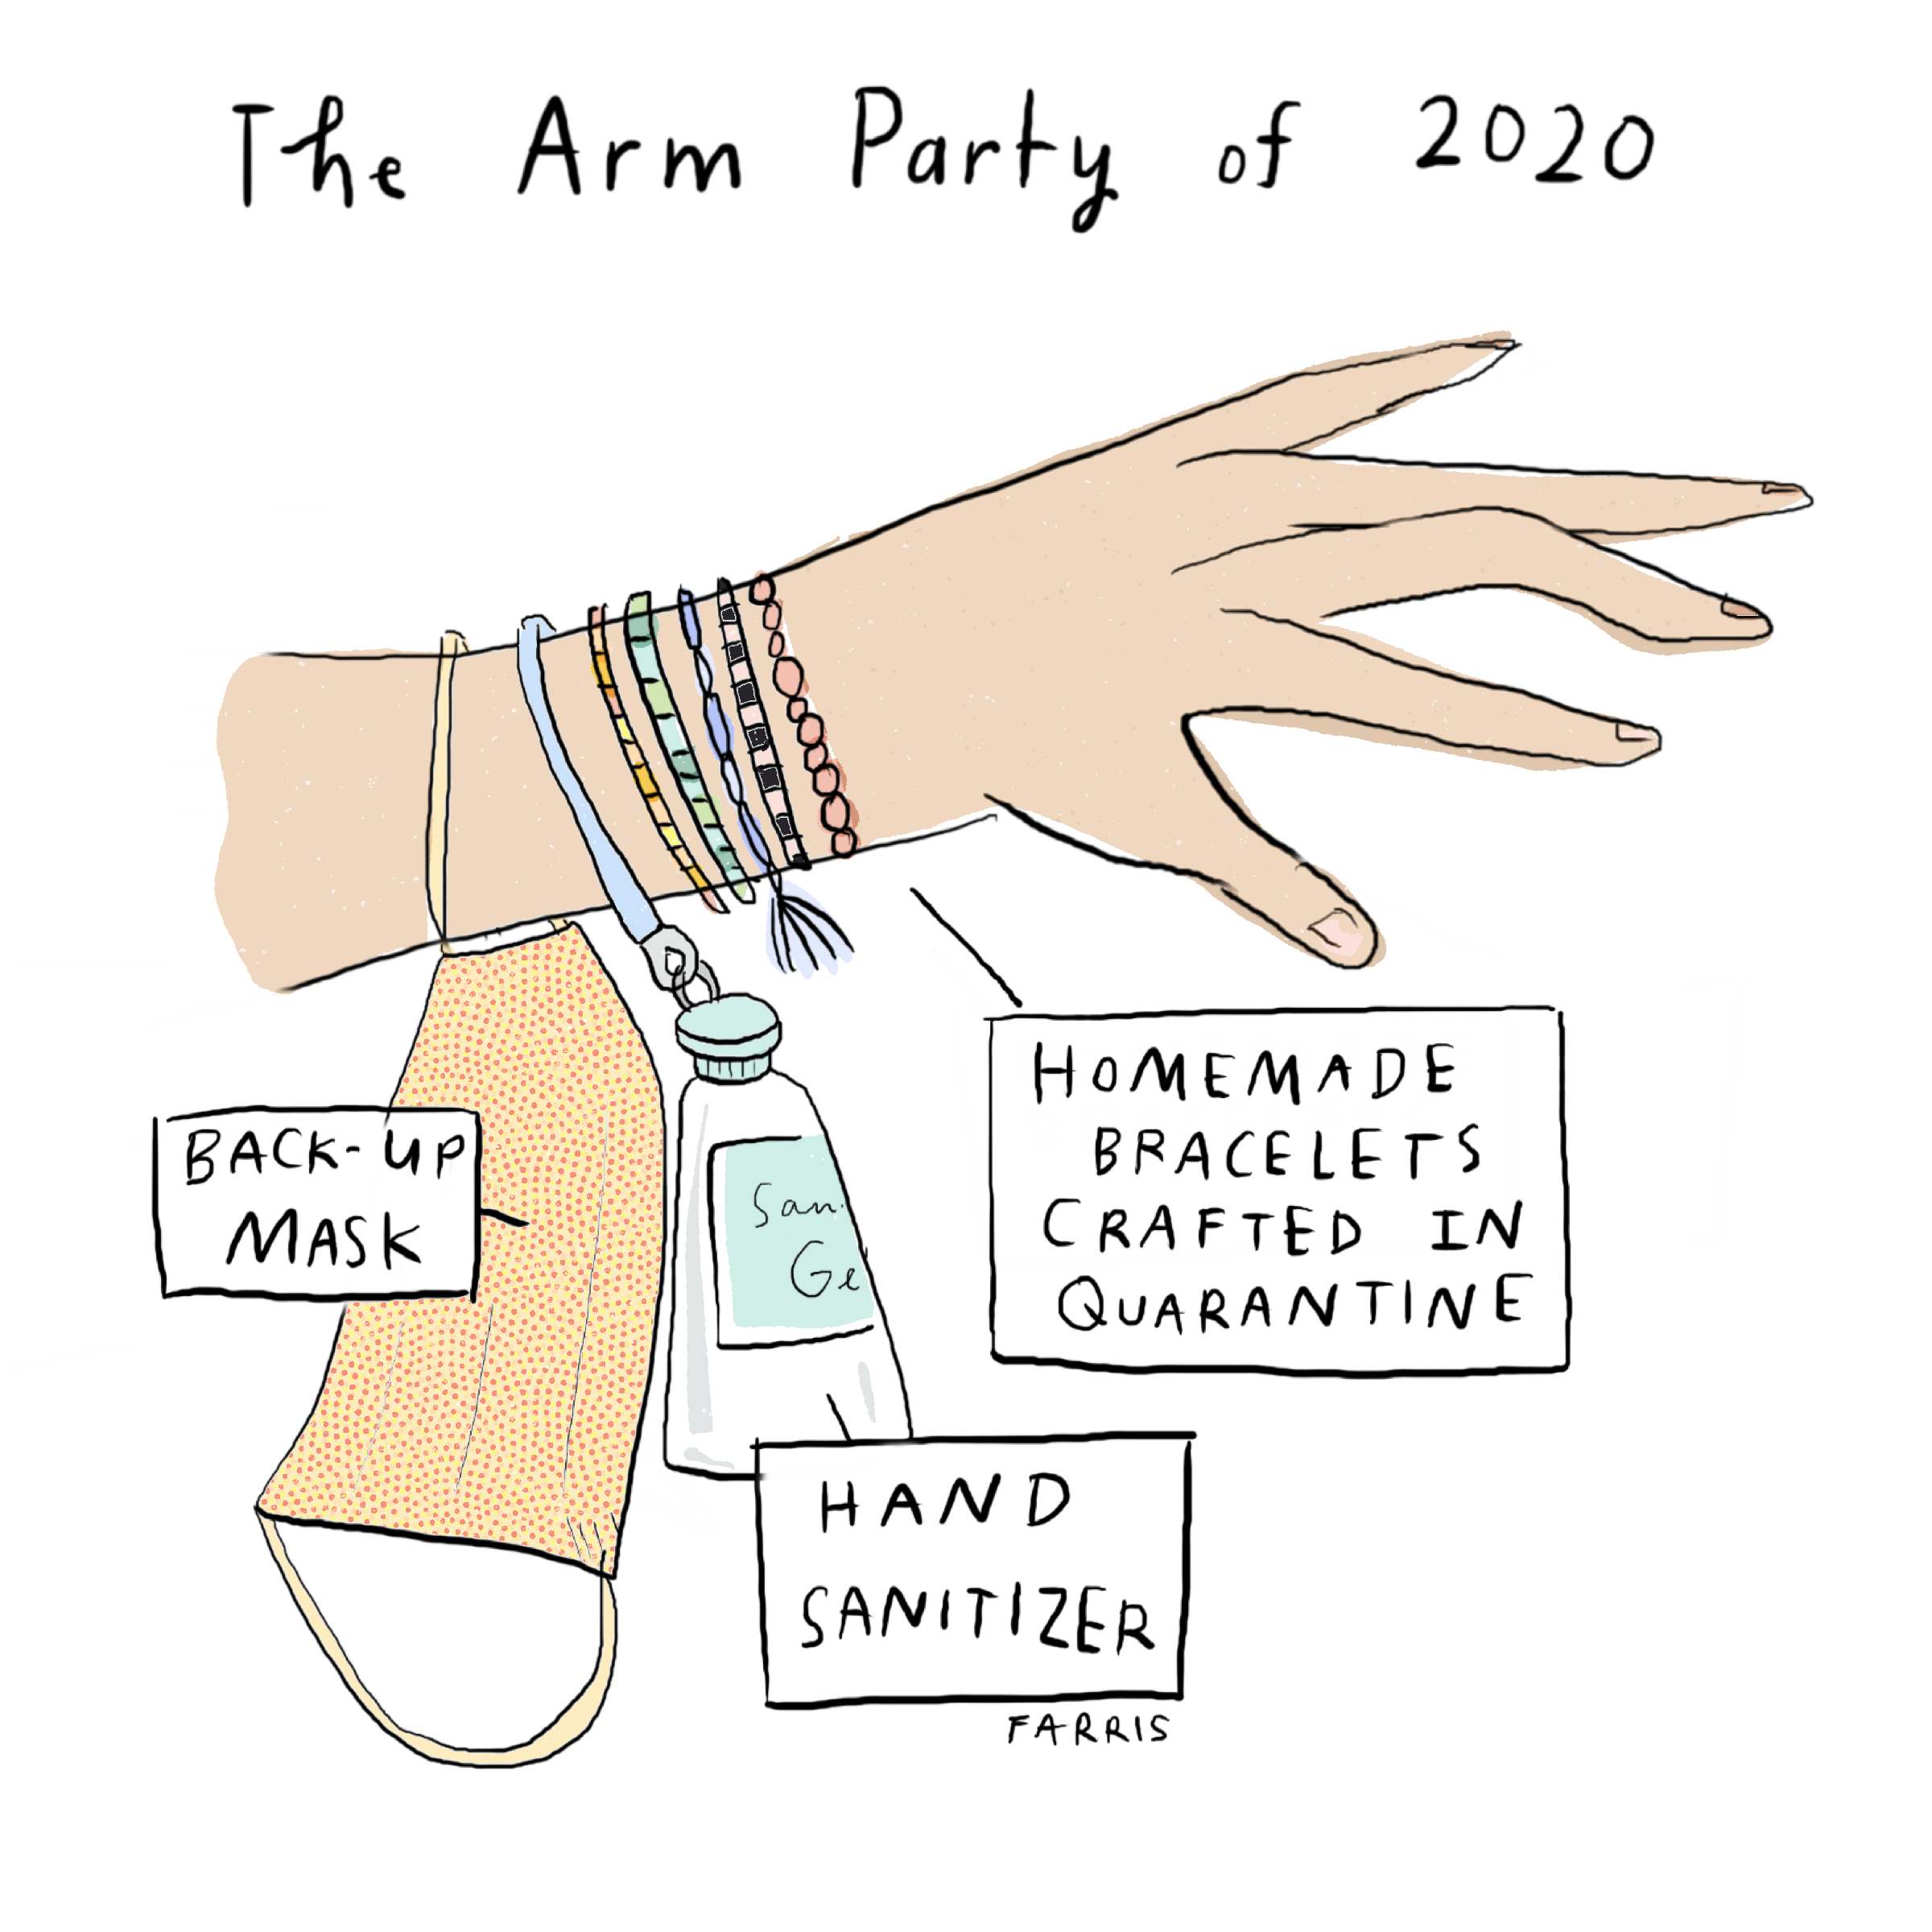 What's in Your Arm Party?